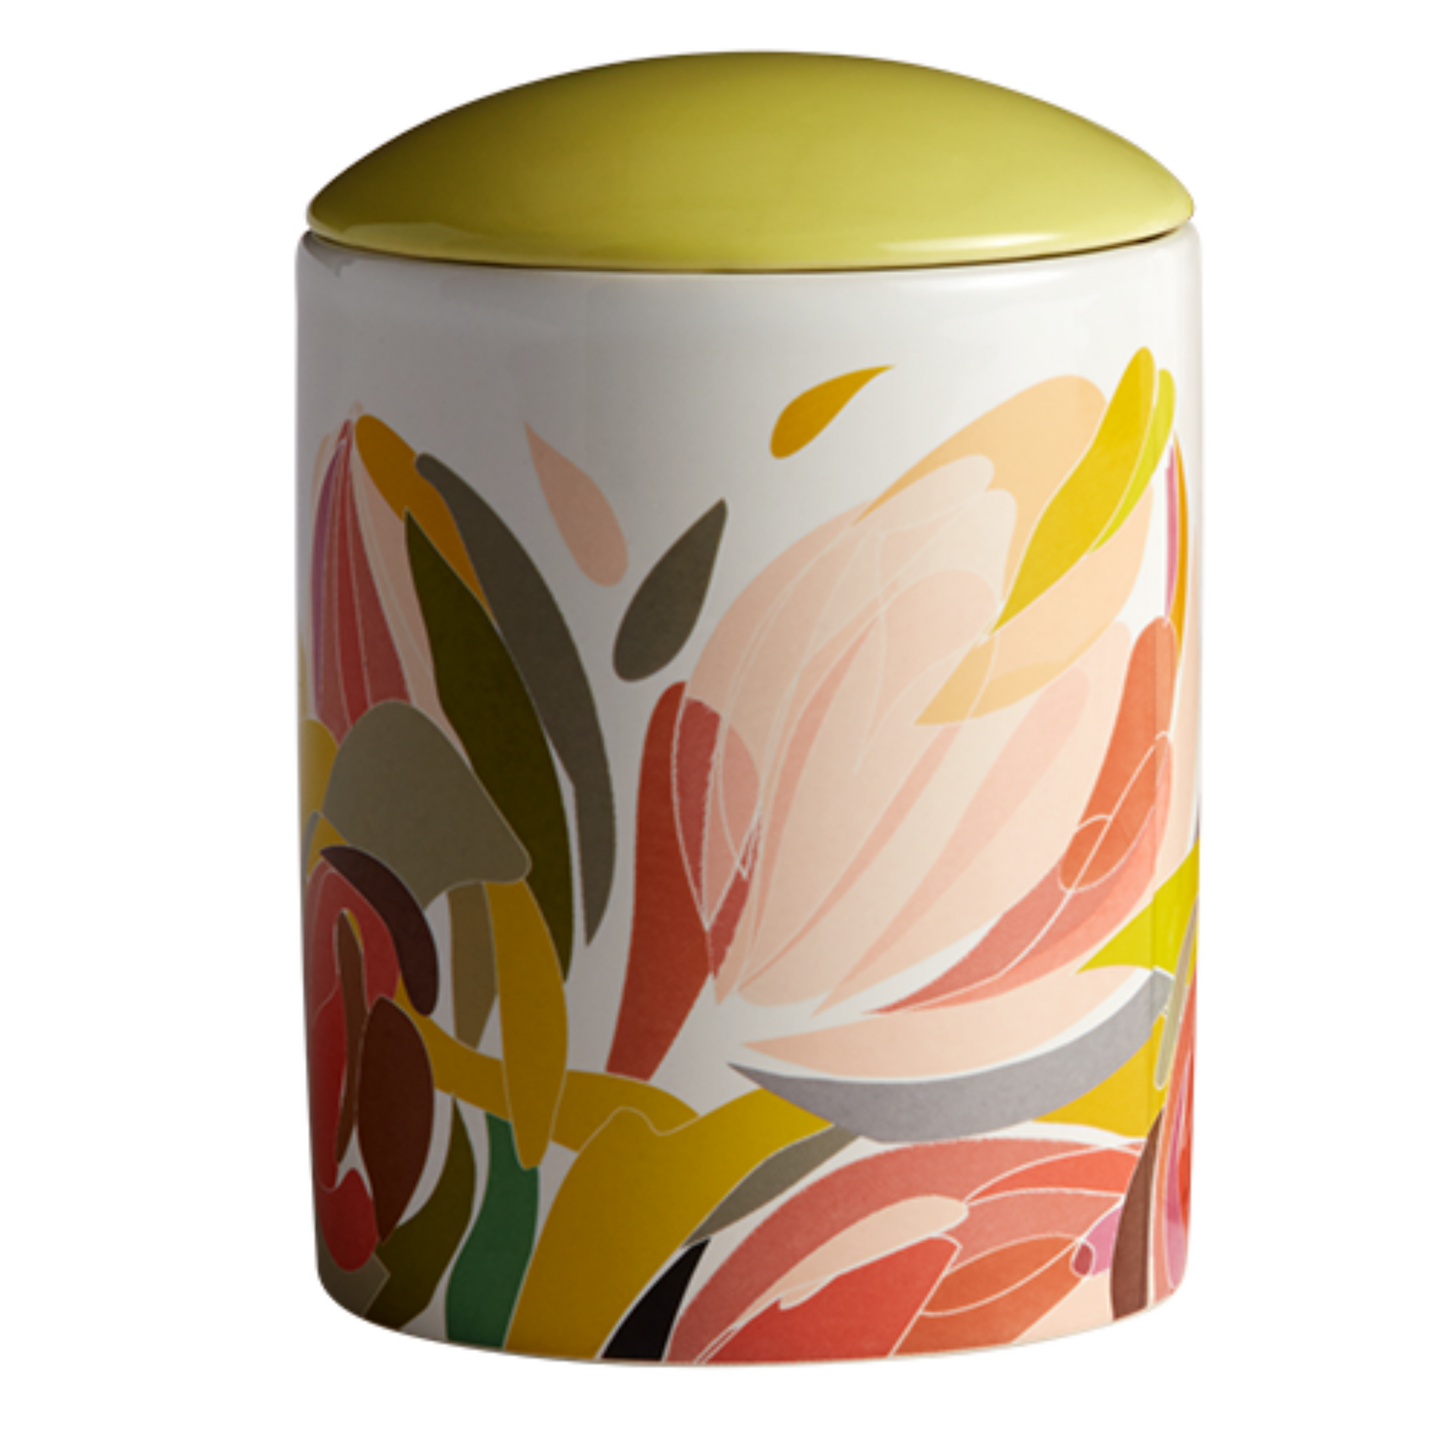 Primary image of Maia Candle Medium Lid